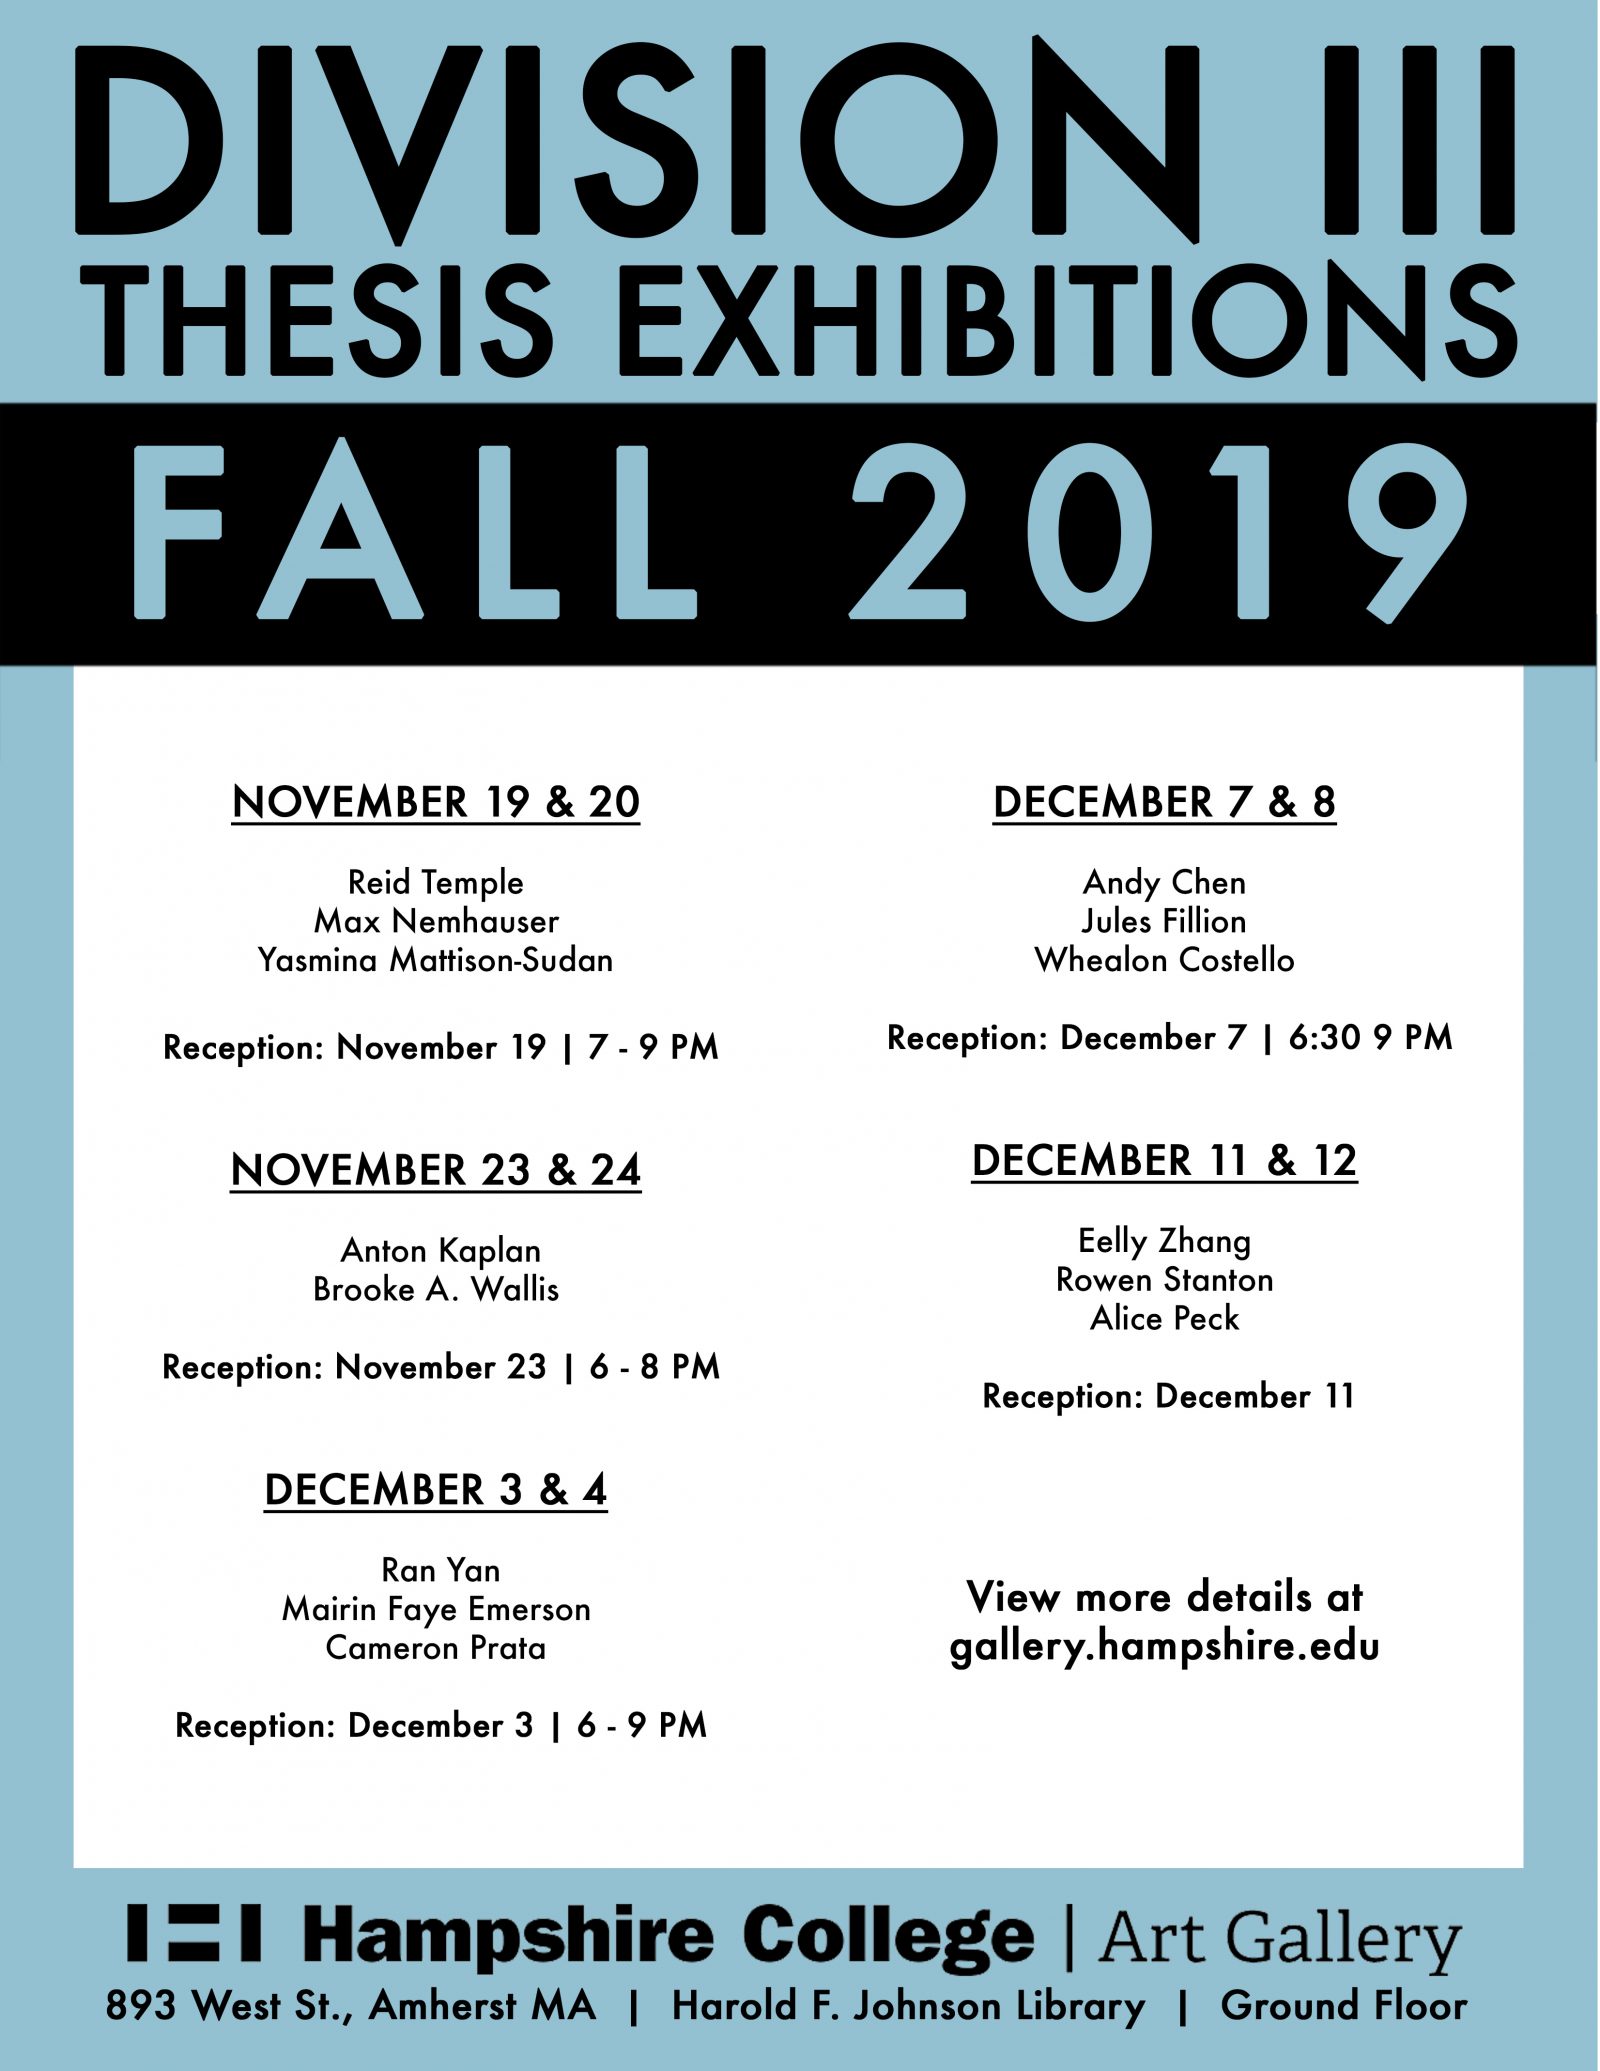 Devision III Thesis Exhibitions Fall 2019 Poster.